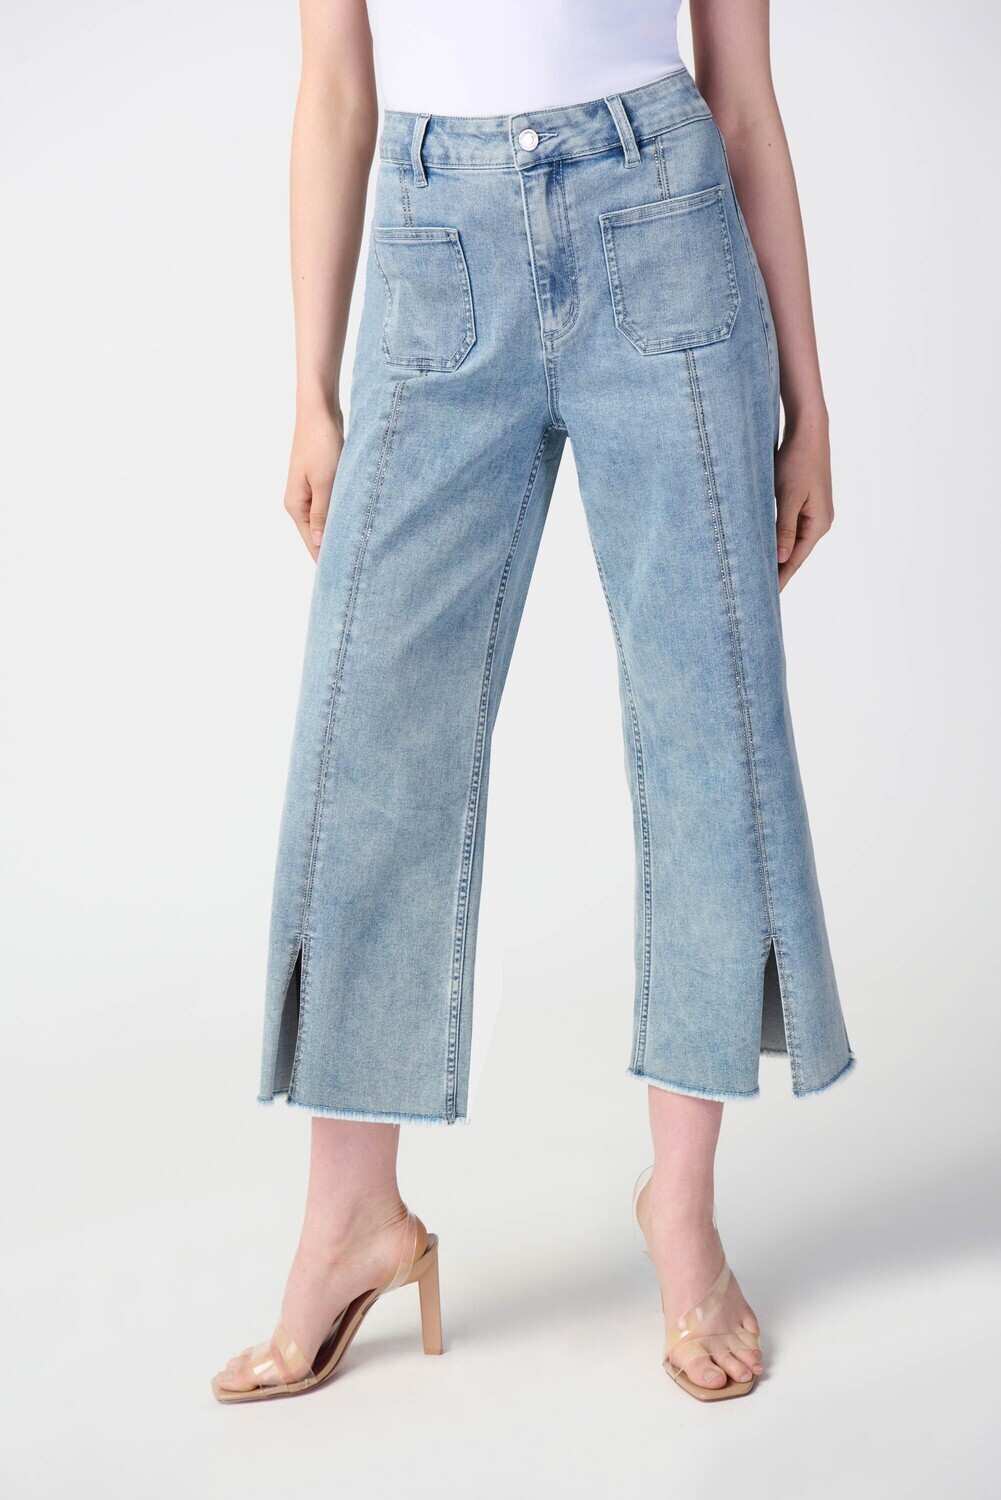 Joseph Ribkoff Culotte Jeans With Embellished Front Seam